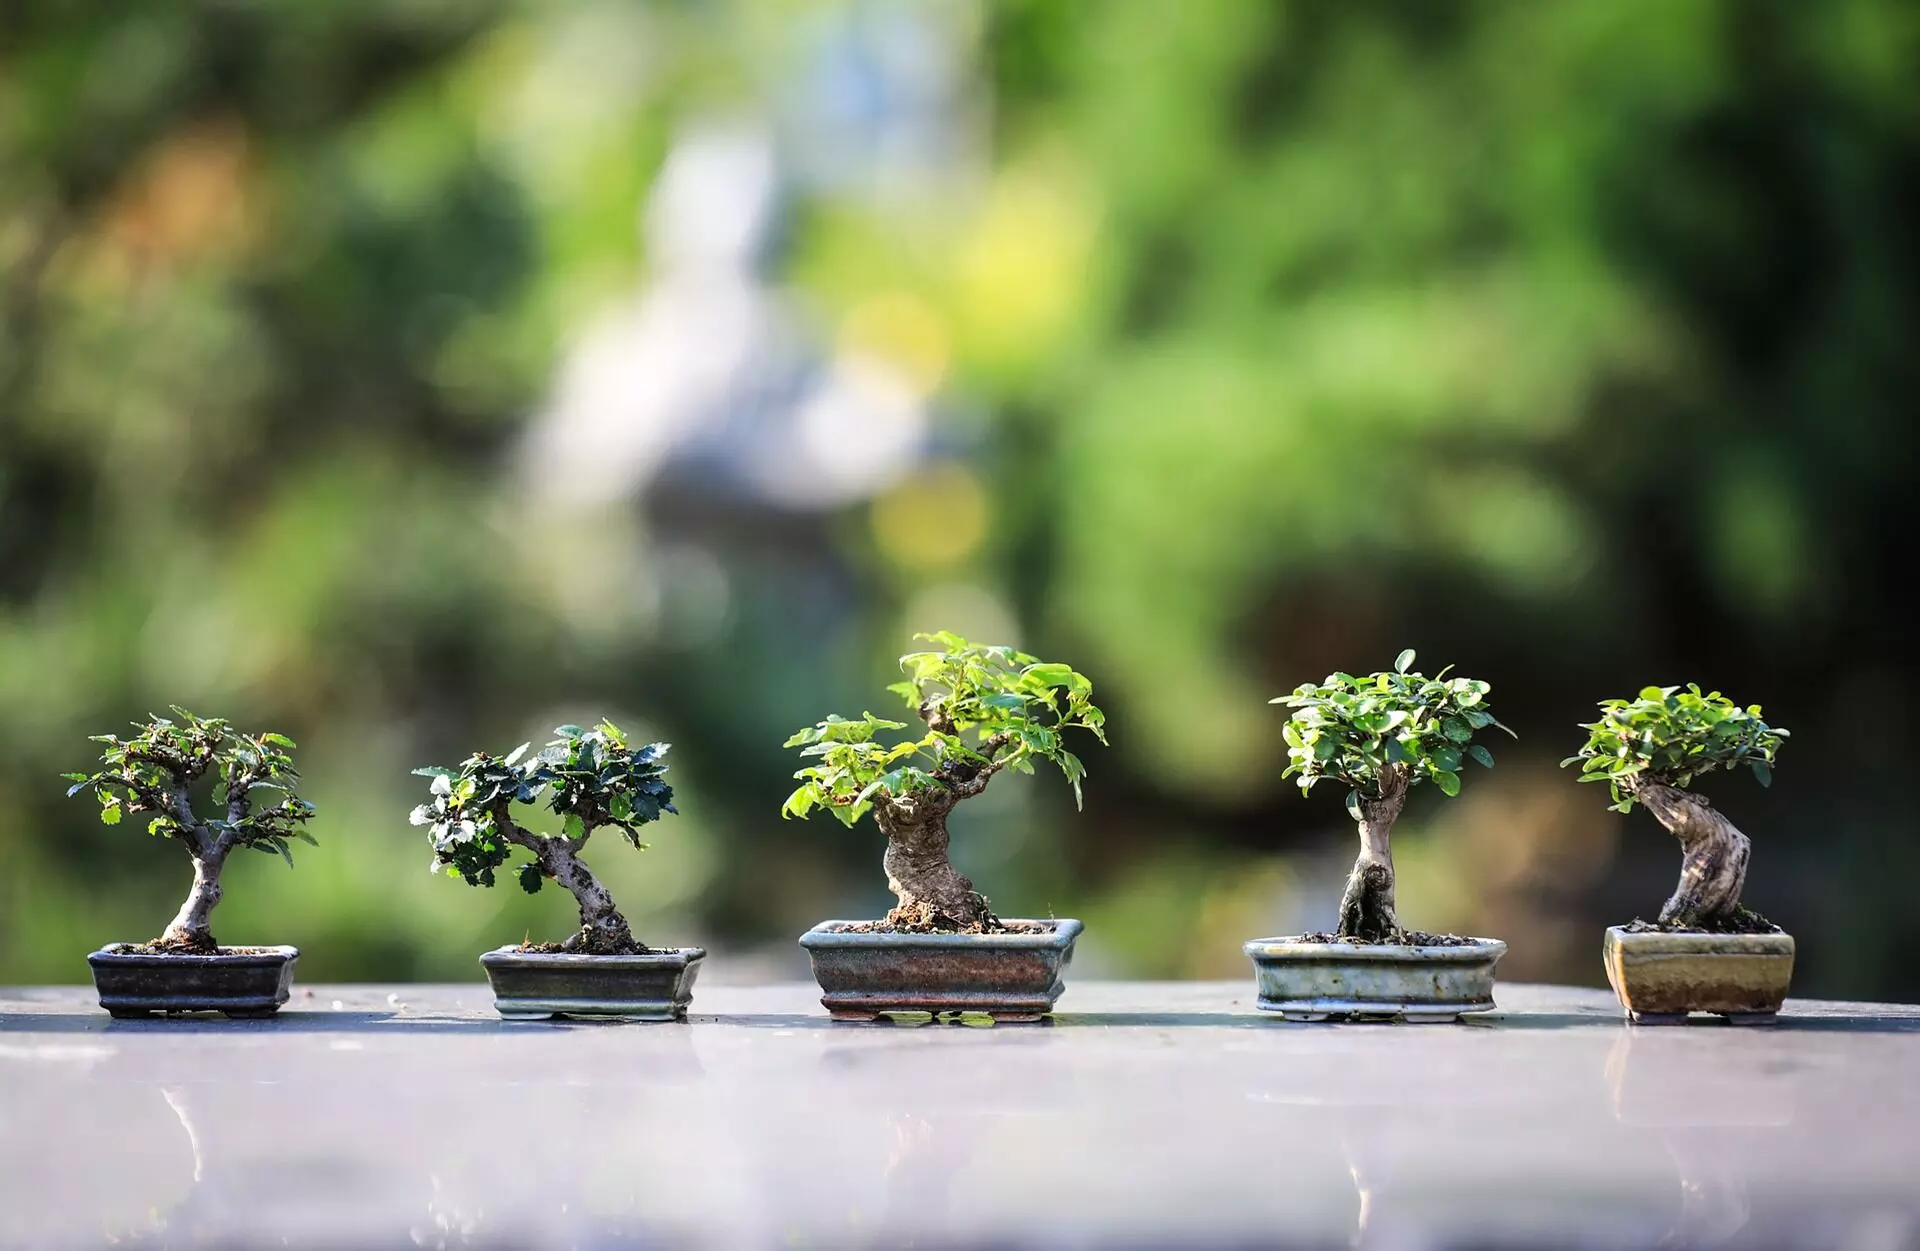 Rare Bonsai tree stolen from former police chiefs house recovered, two thieves arrested